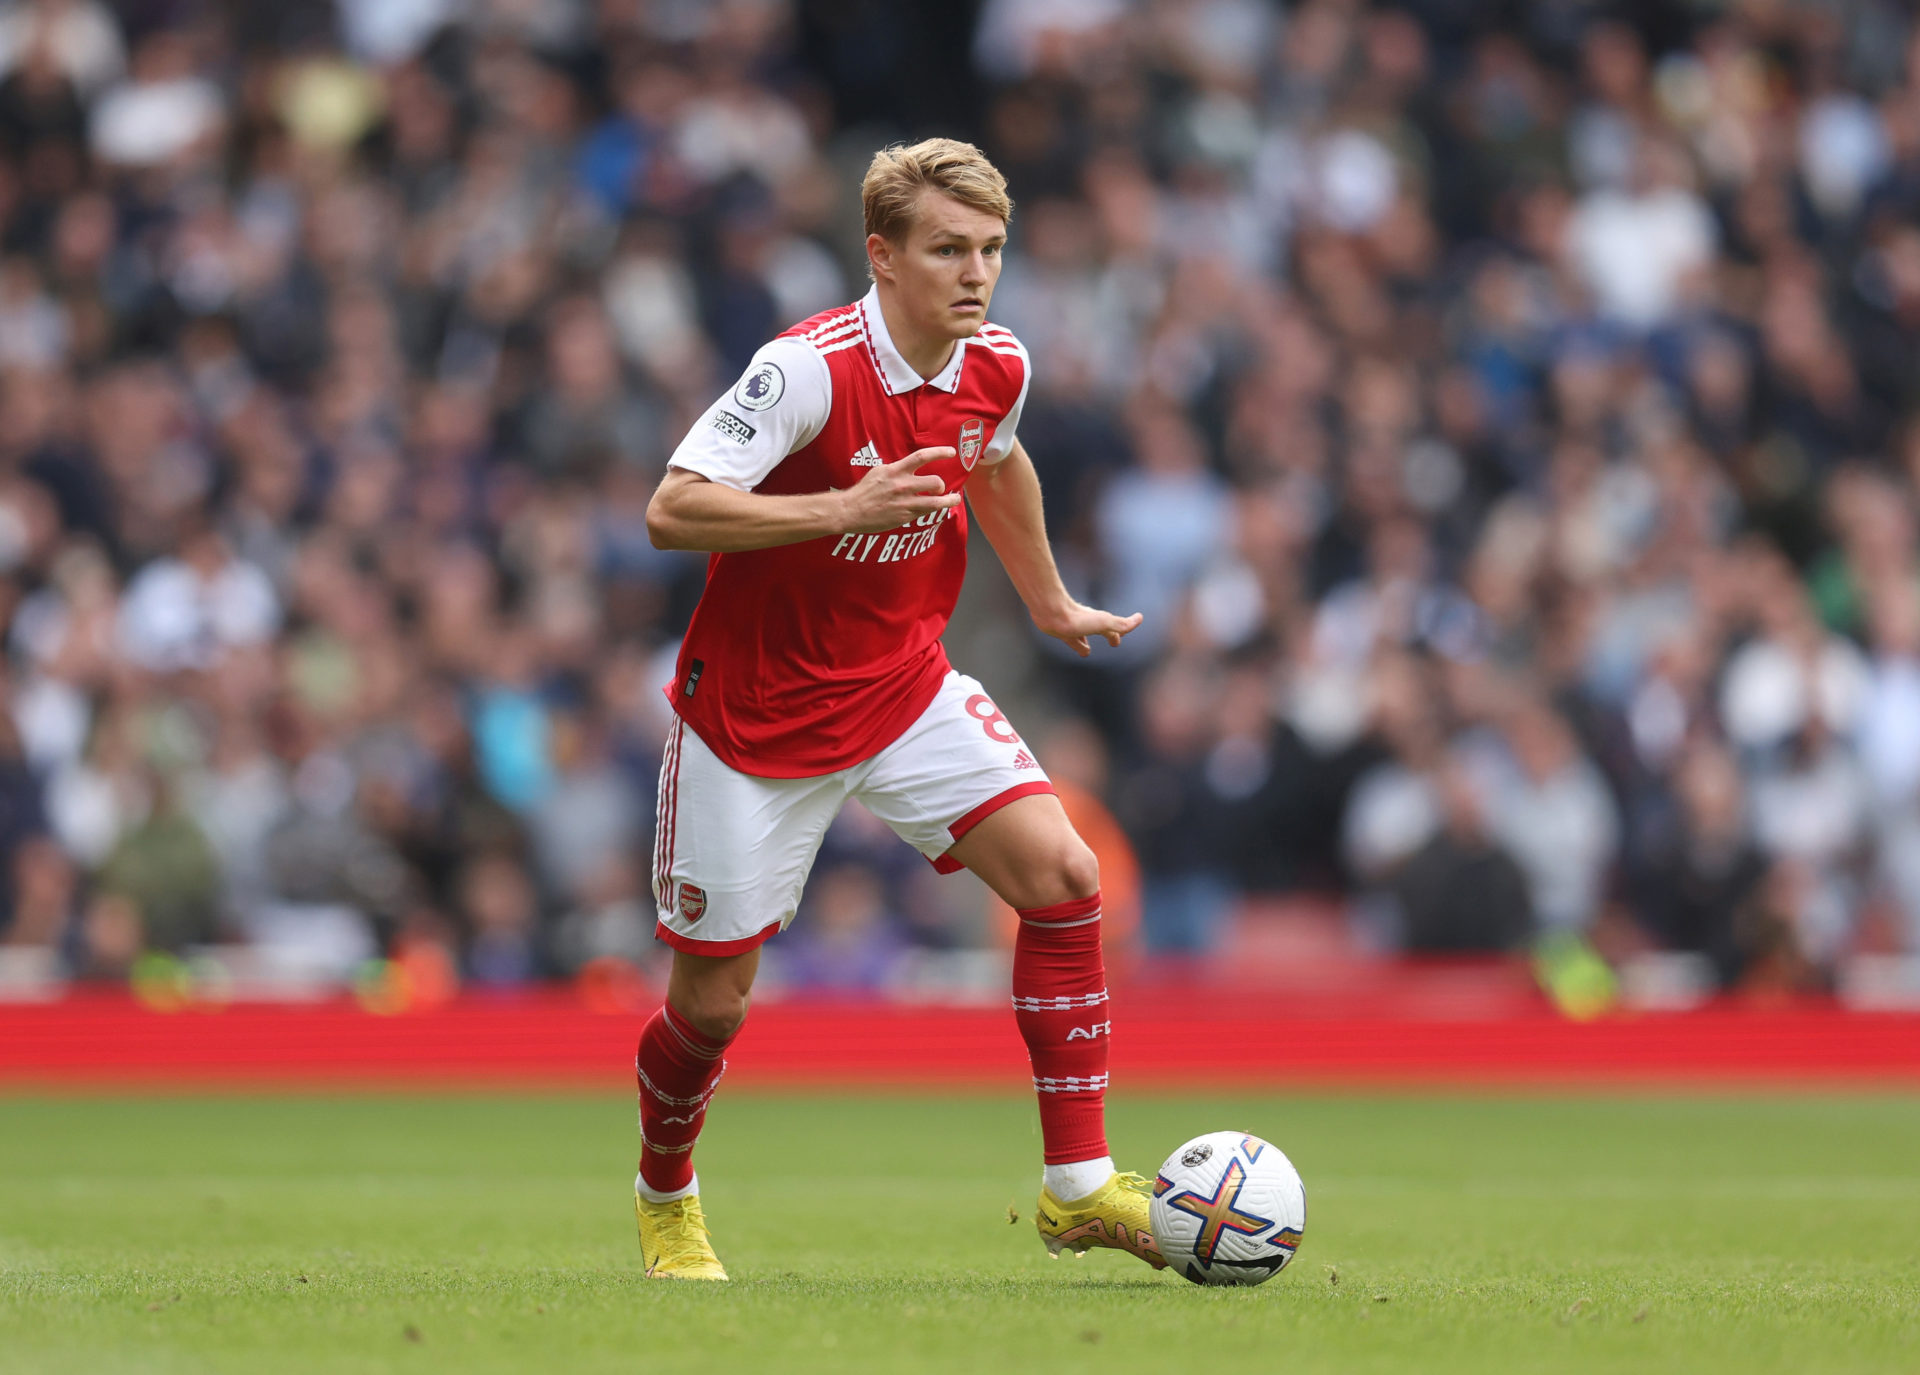 Klopp cannot say anything negative about Odegaard